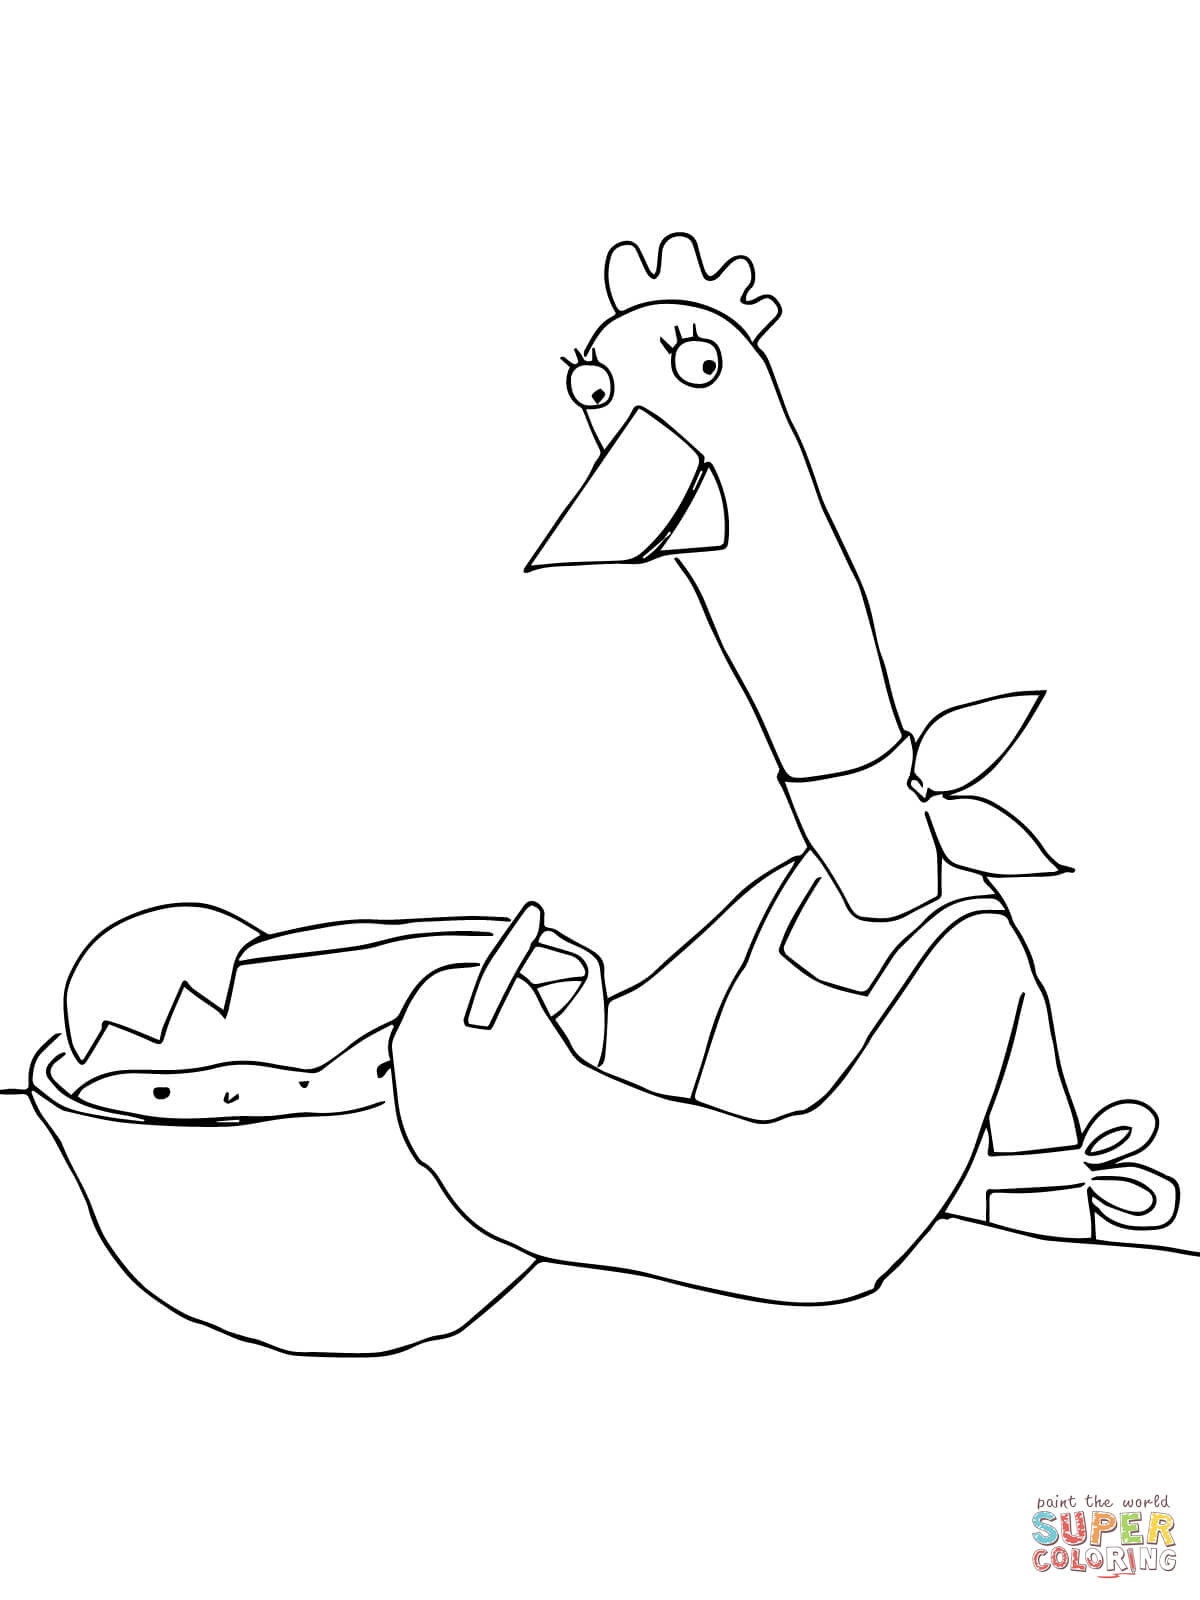 The Little Red Hen Coloring Pages Little Red Hen Coloring Pages Free Coloring Pages